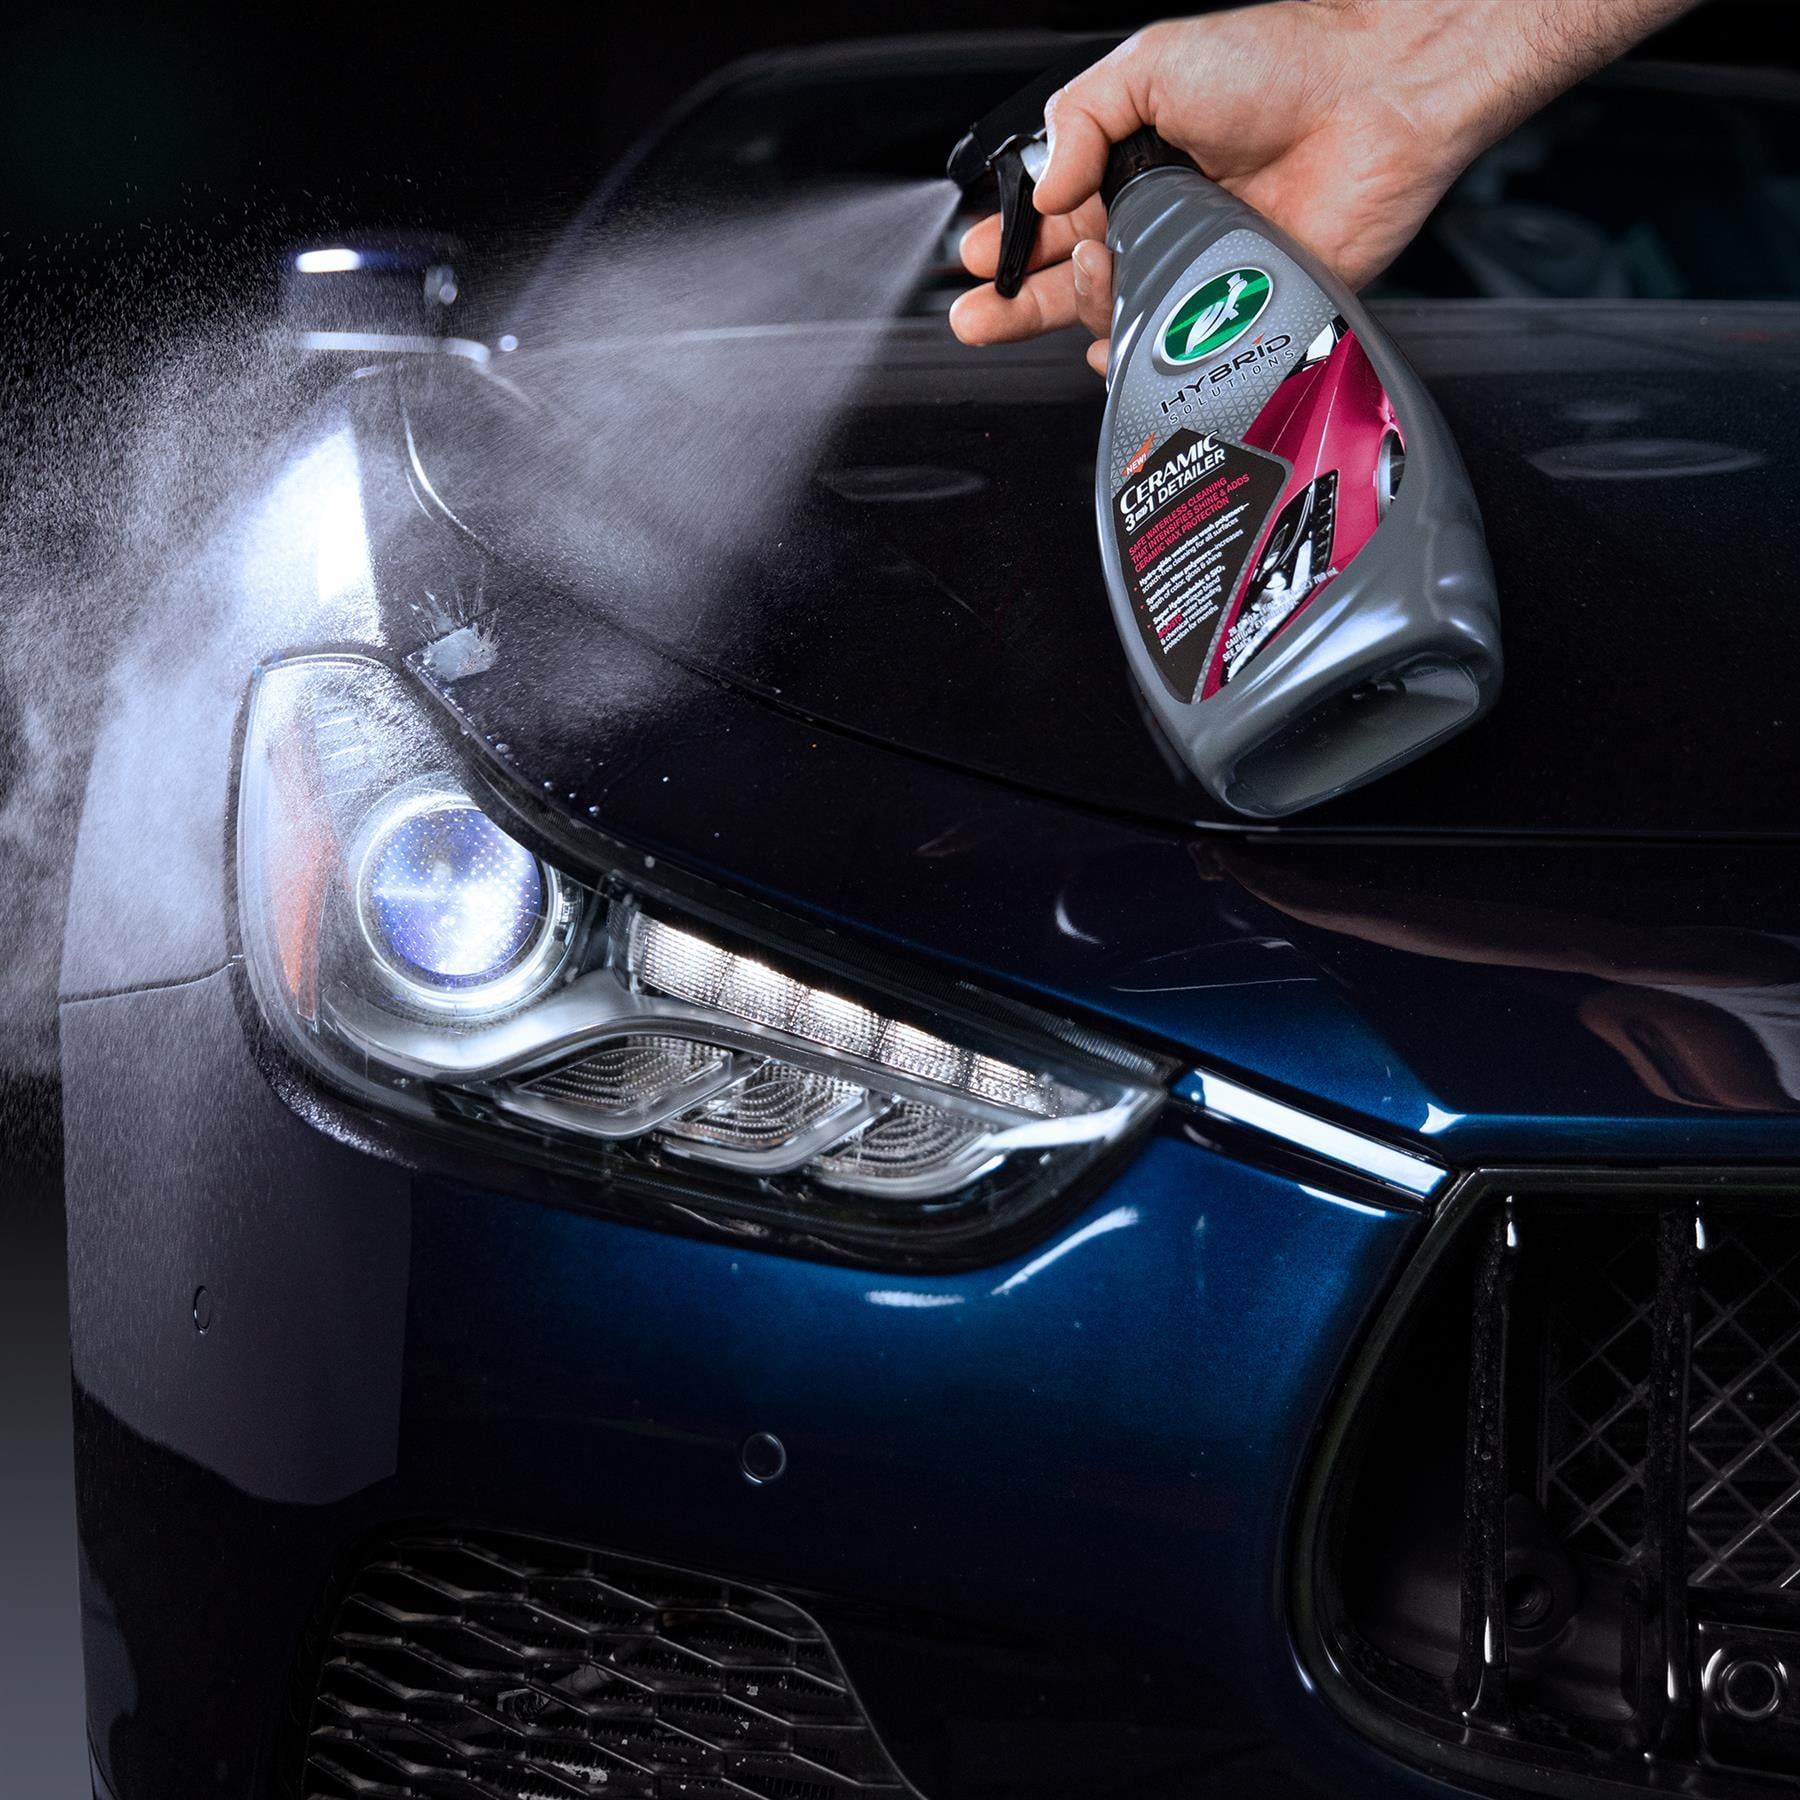  Turtle Wax Hybrid Solutions Ceramic Wax Coating, Ceramic Wash,  and Ceramic Detailer Combo Pack- Ultimate Protection and Water Repellancy  for Car Paint : Automotive